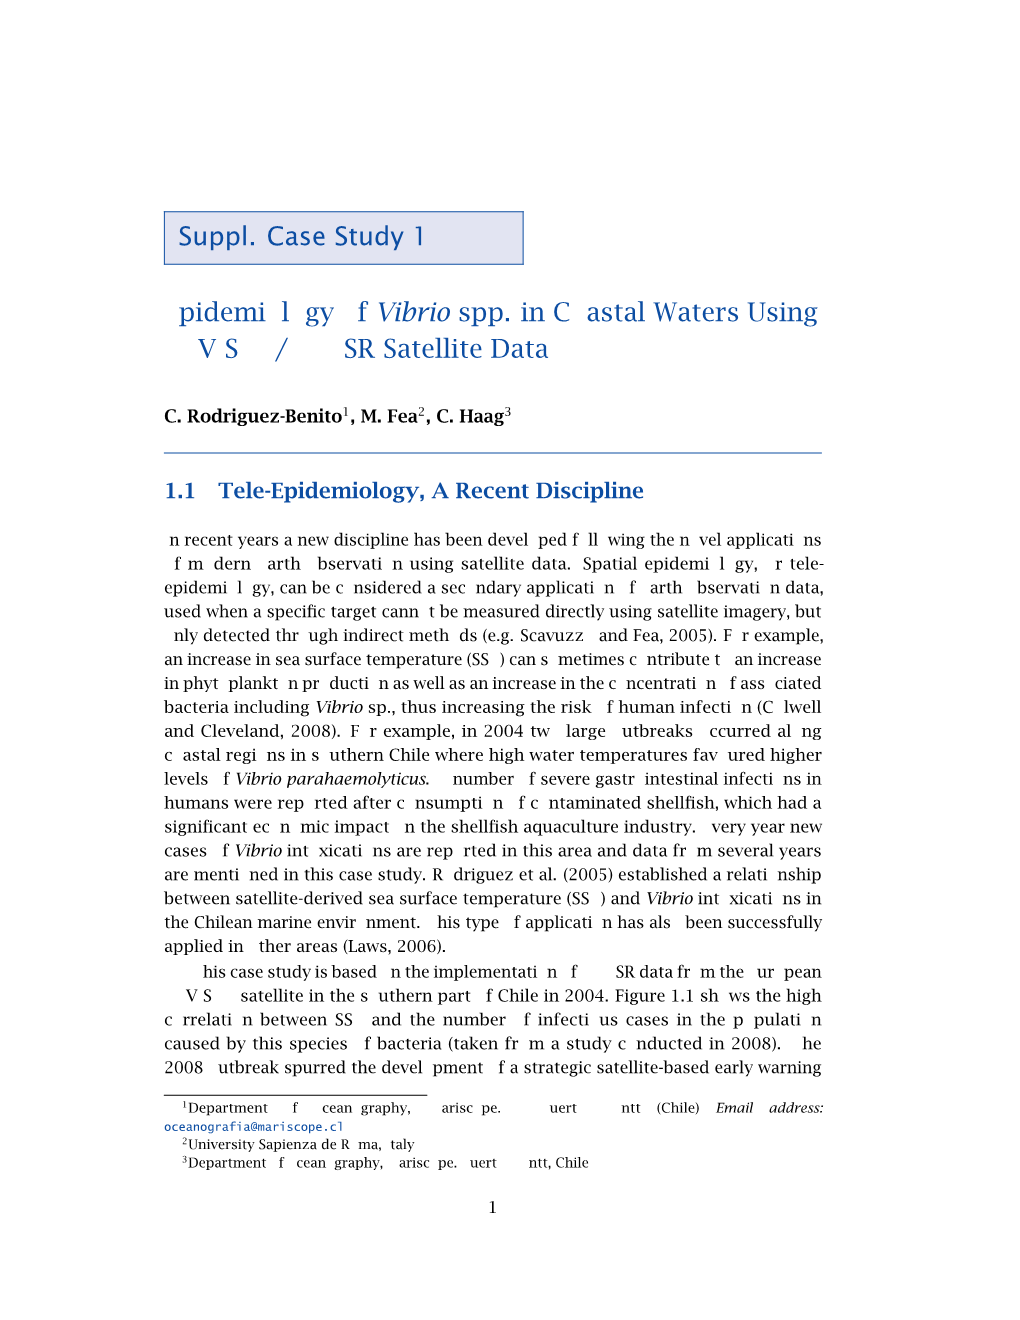 Suppl. Case Study 1 Epidemiology of Vibrio Spp. in Coastal Waters Using